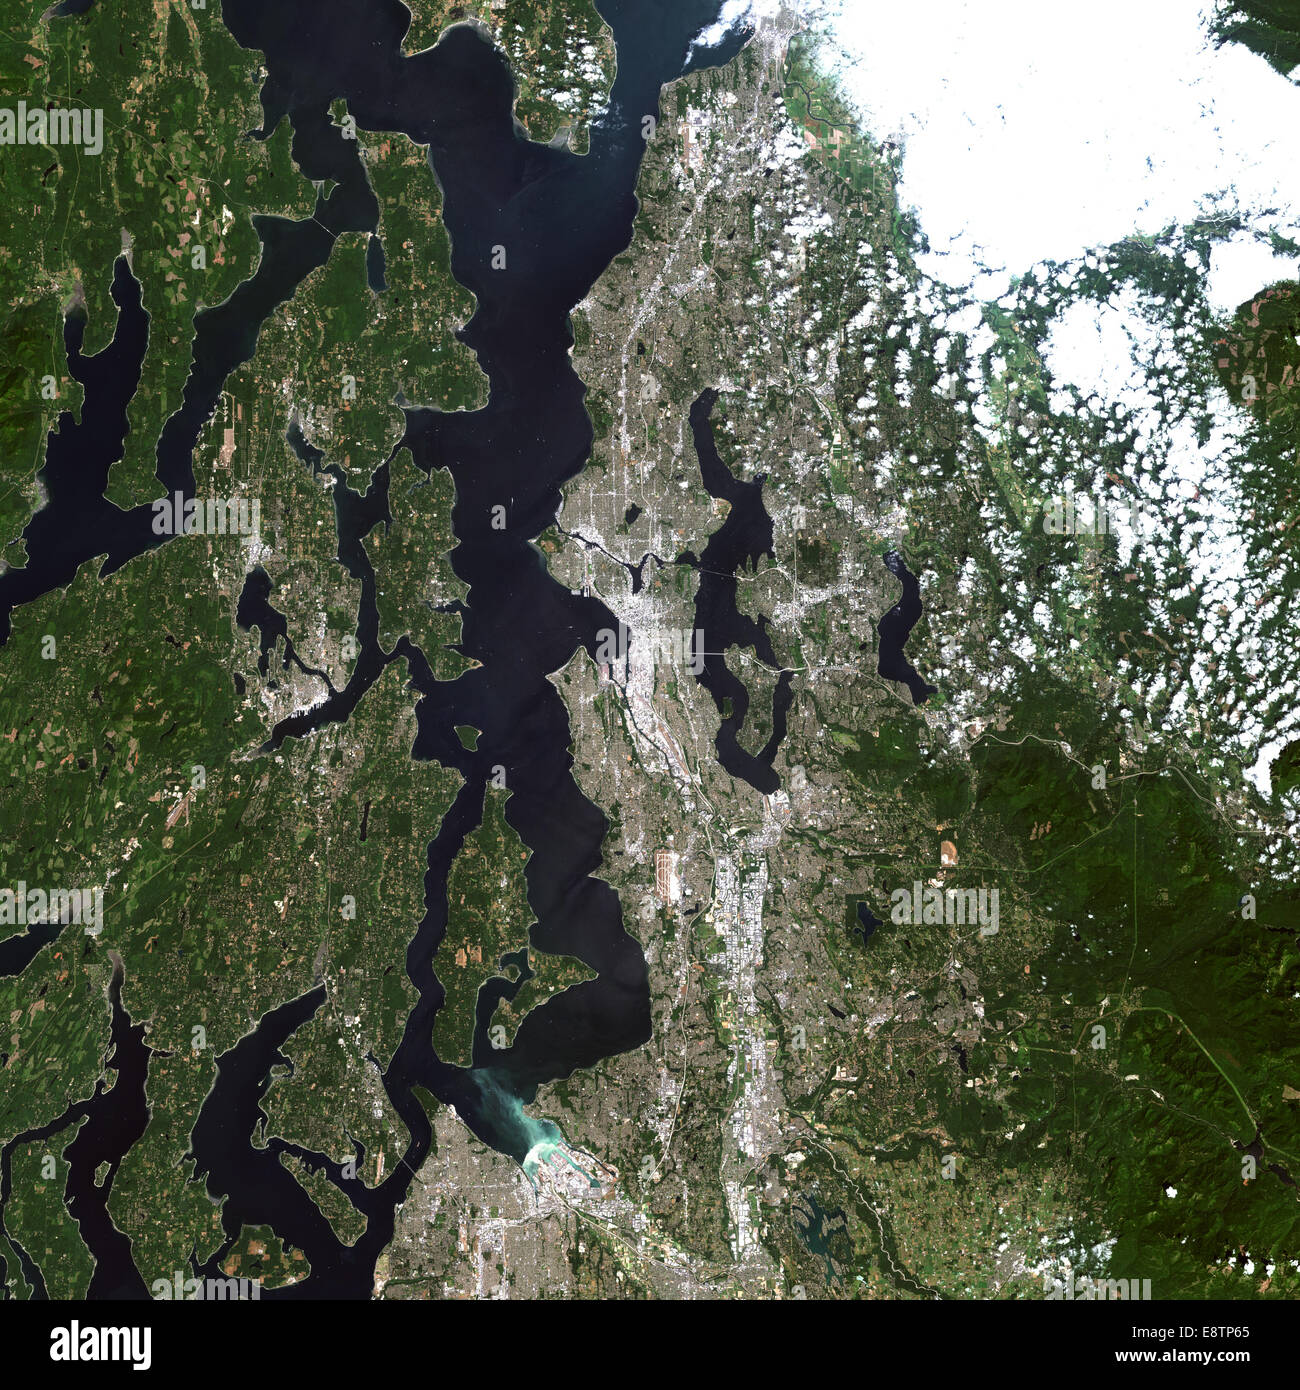 Landsat 7 image of Seattle, Washington acquired August 4, 2013. Landsat 7 is a U.S. satellite used to acquire remotely sensed images of the Earth's land surface and surrounding coastal regions. It is maintained by the Landsat 7 Project Science Office at t Stock Photo